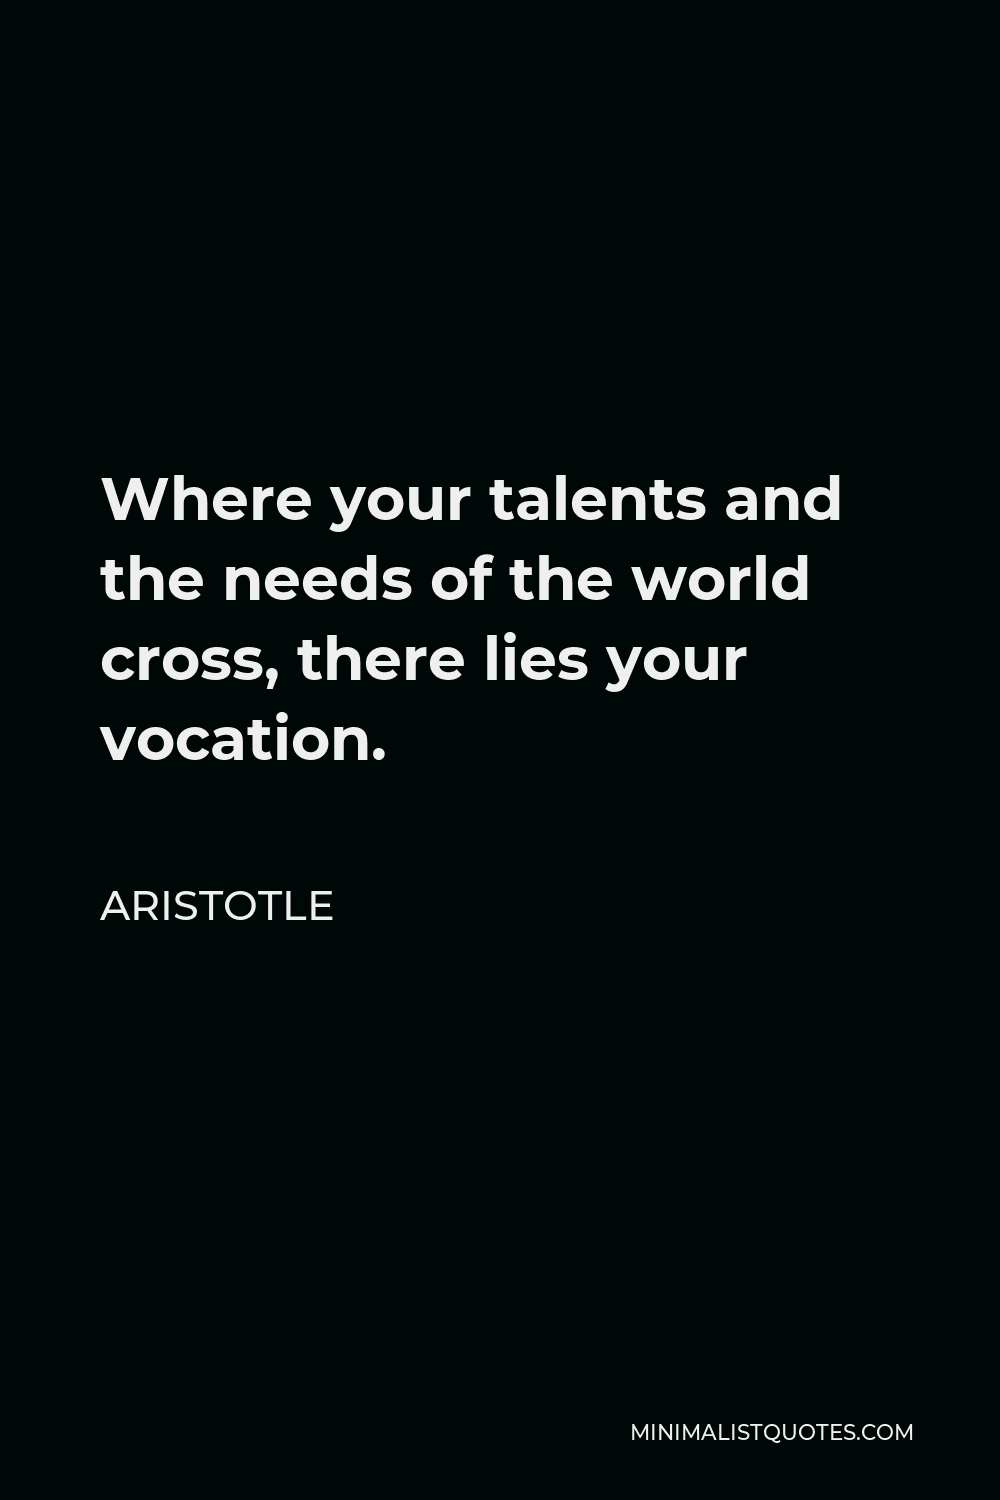 Aristotle Quote - Where your talents and the needs of the world cross, there lies your vocation.